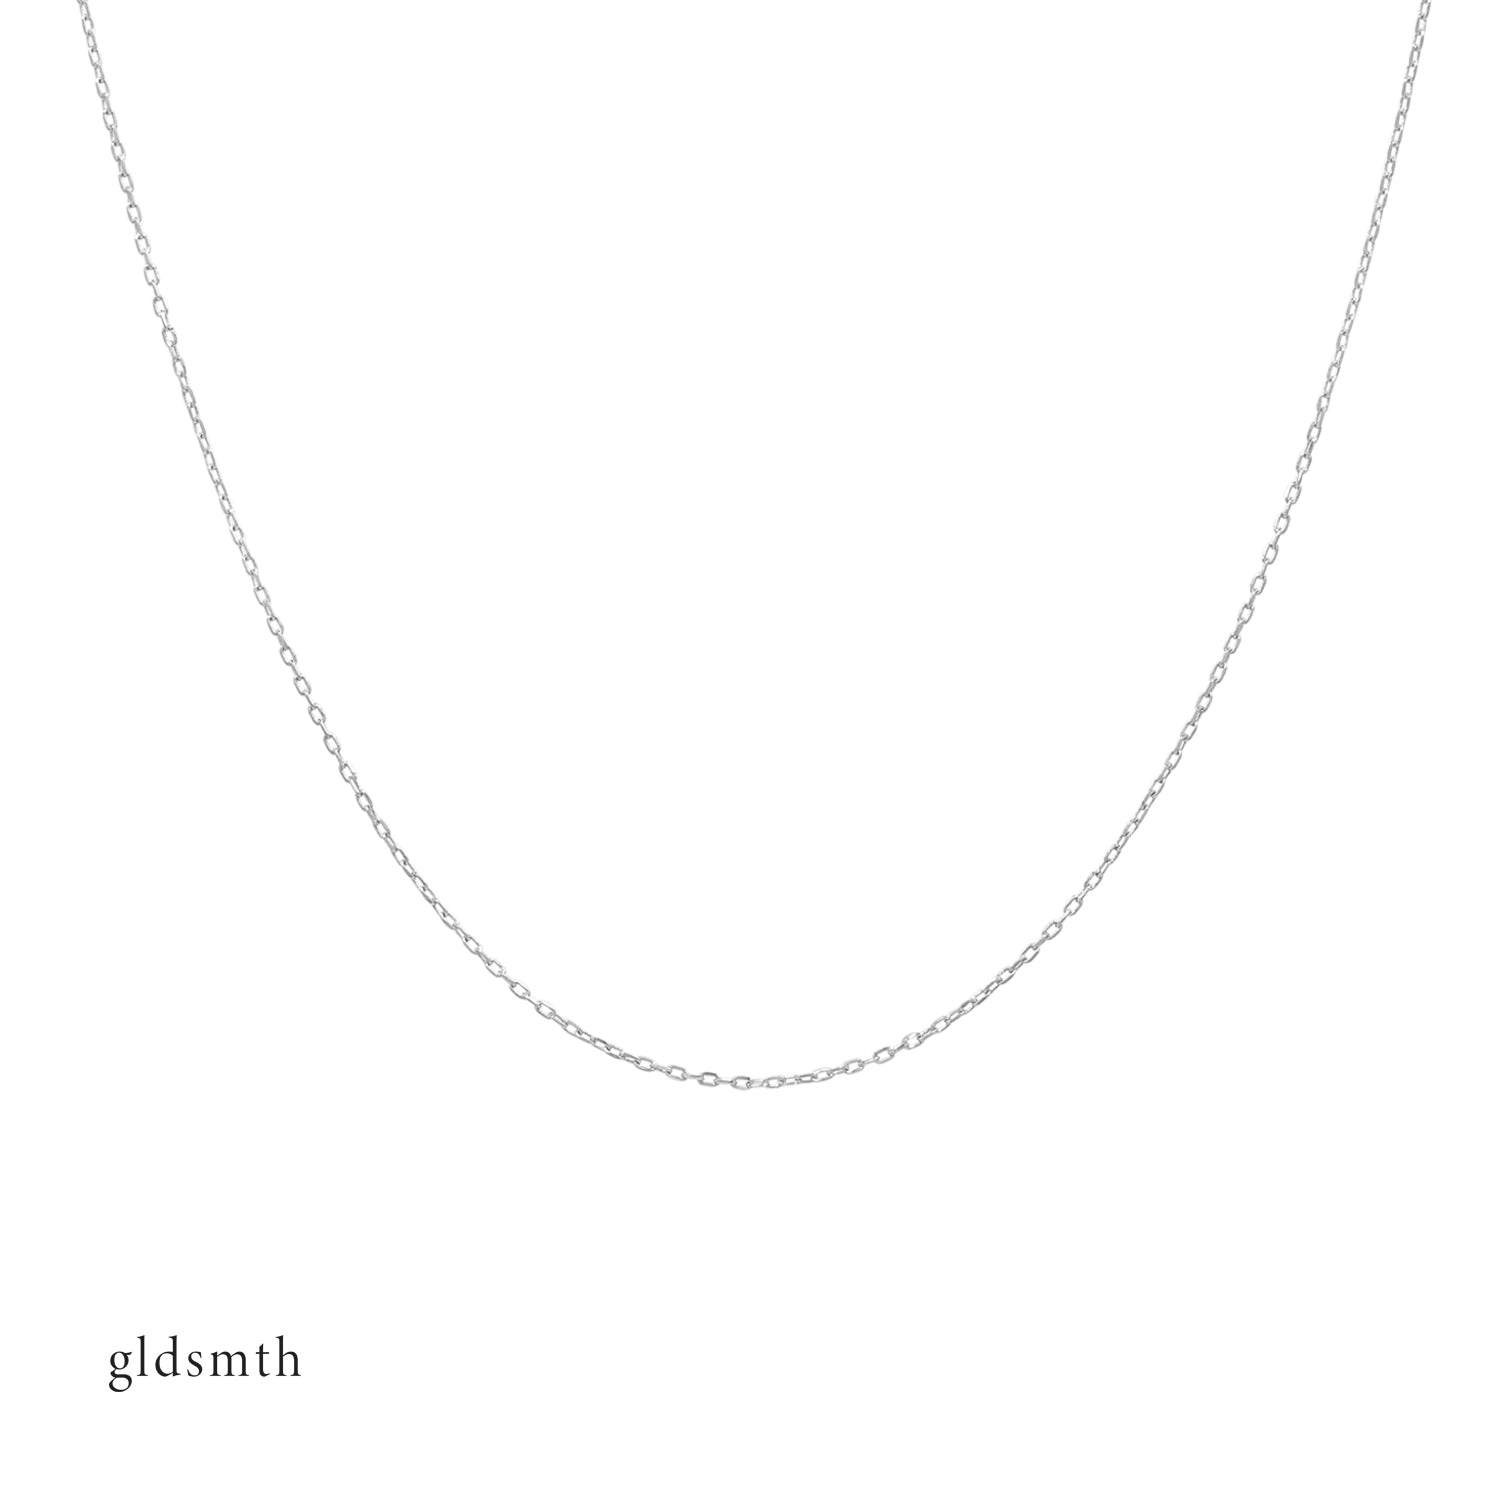 Elegant and minimalist necklace. Handcrafted 14k solid white gold necklace chain